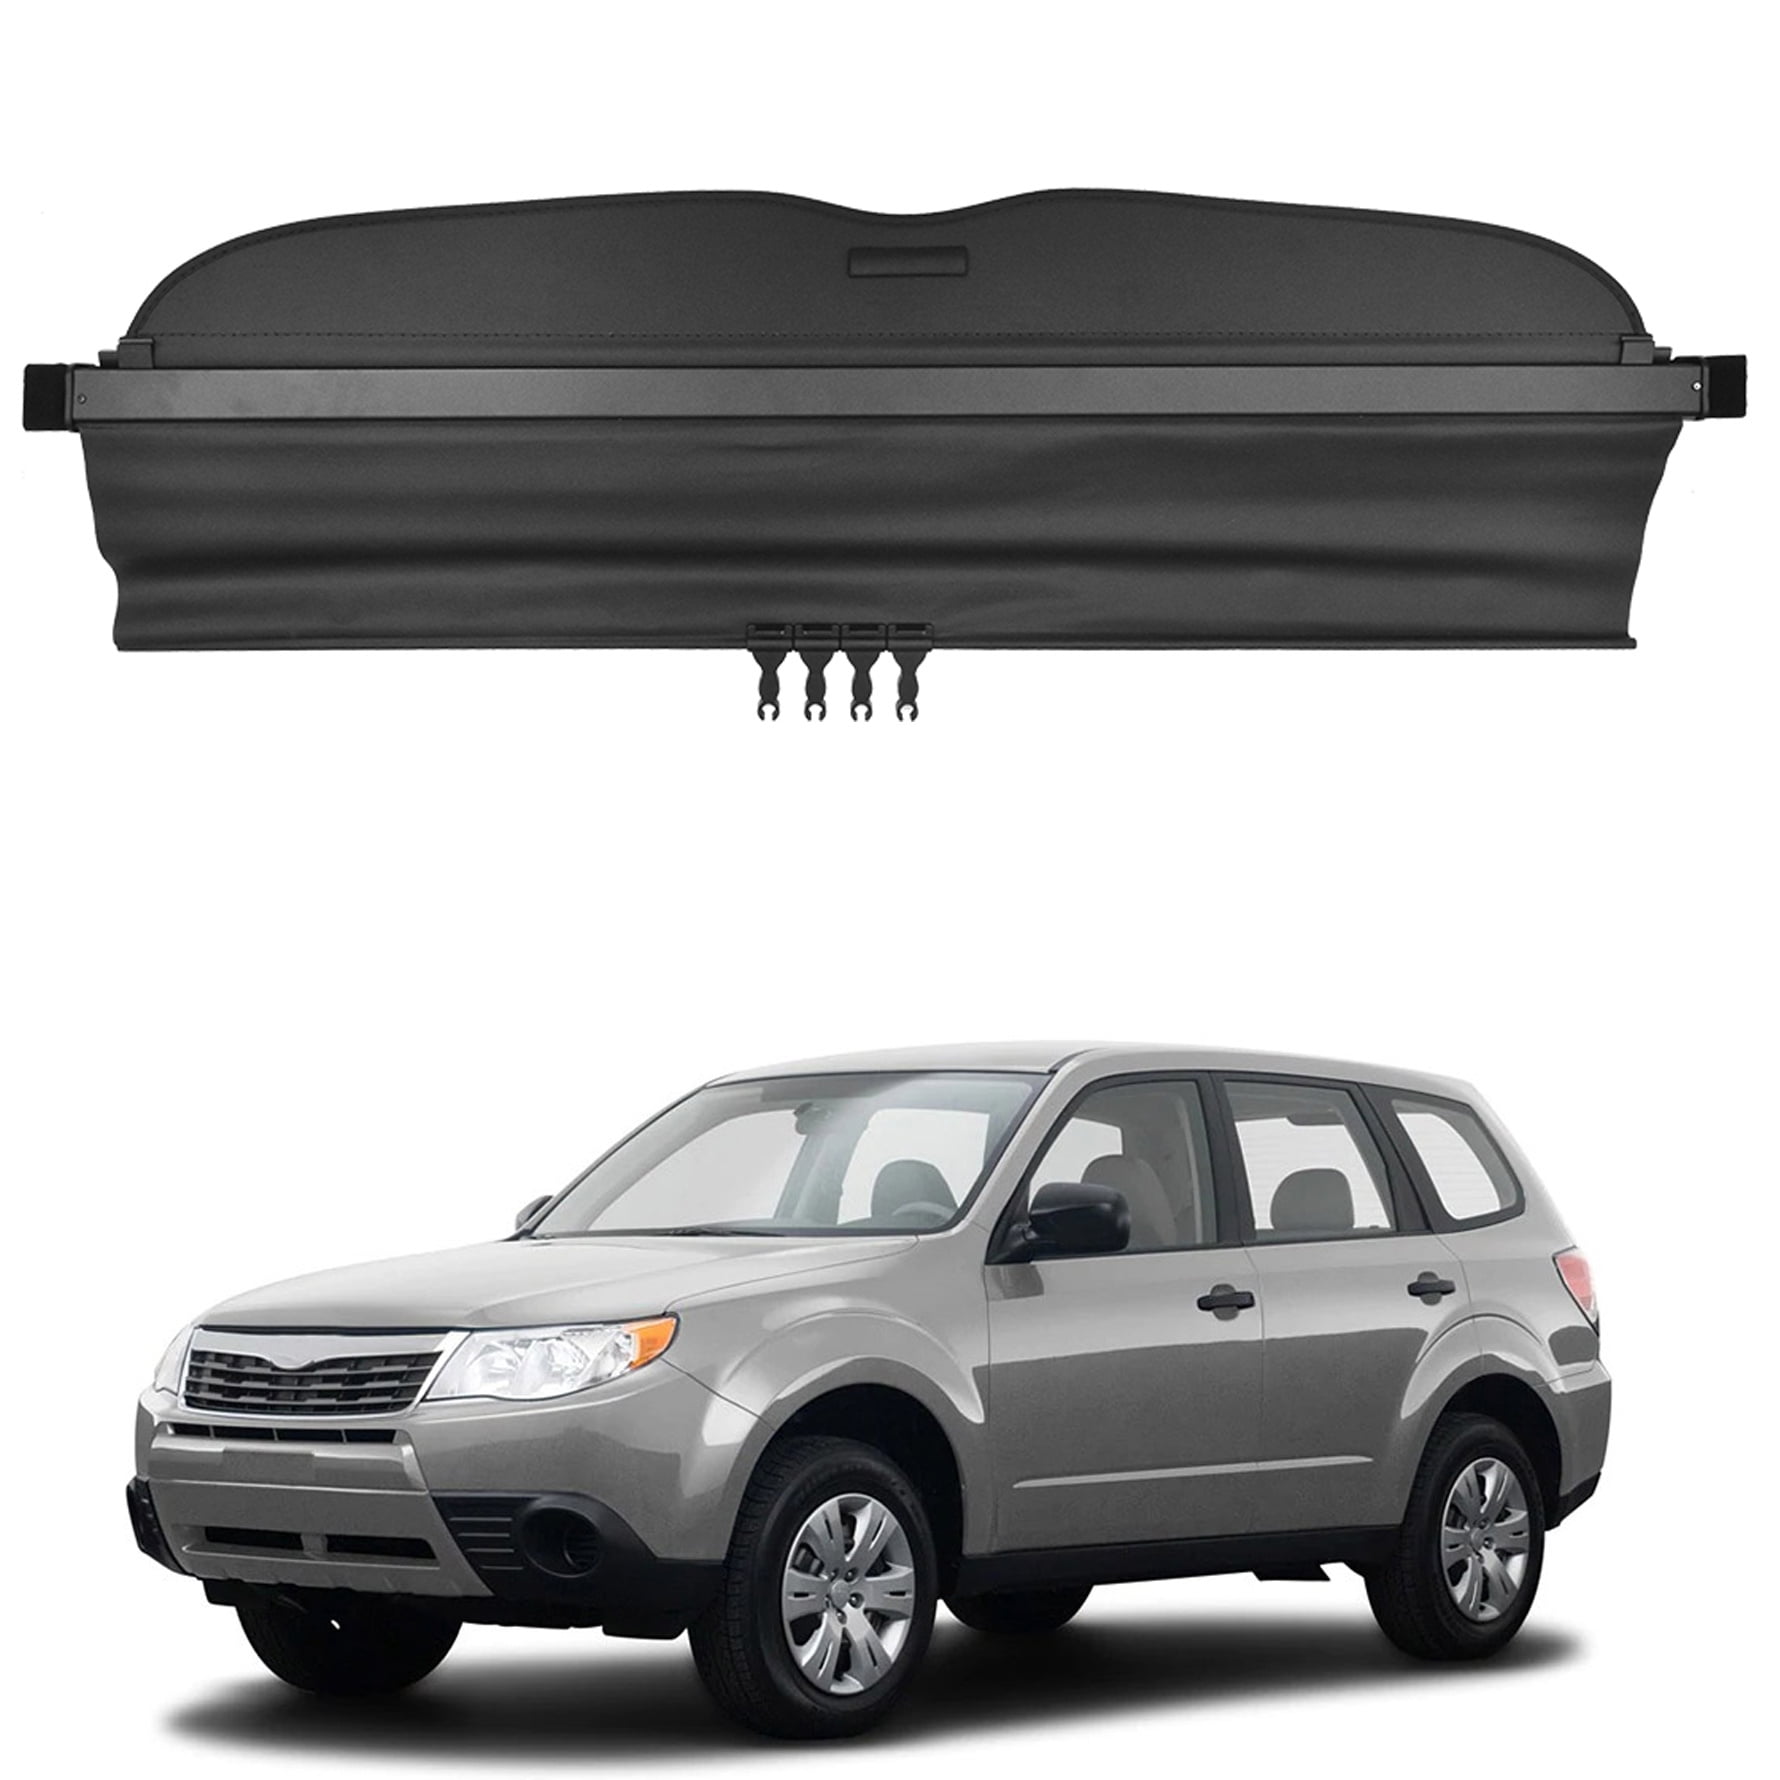 Kaungka Cargo Cover Retractable Compatible with 09-13 SubAru Forester Black with manual rear gate 